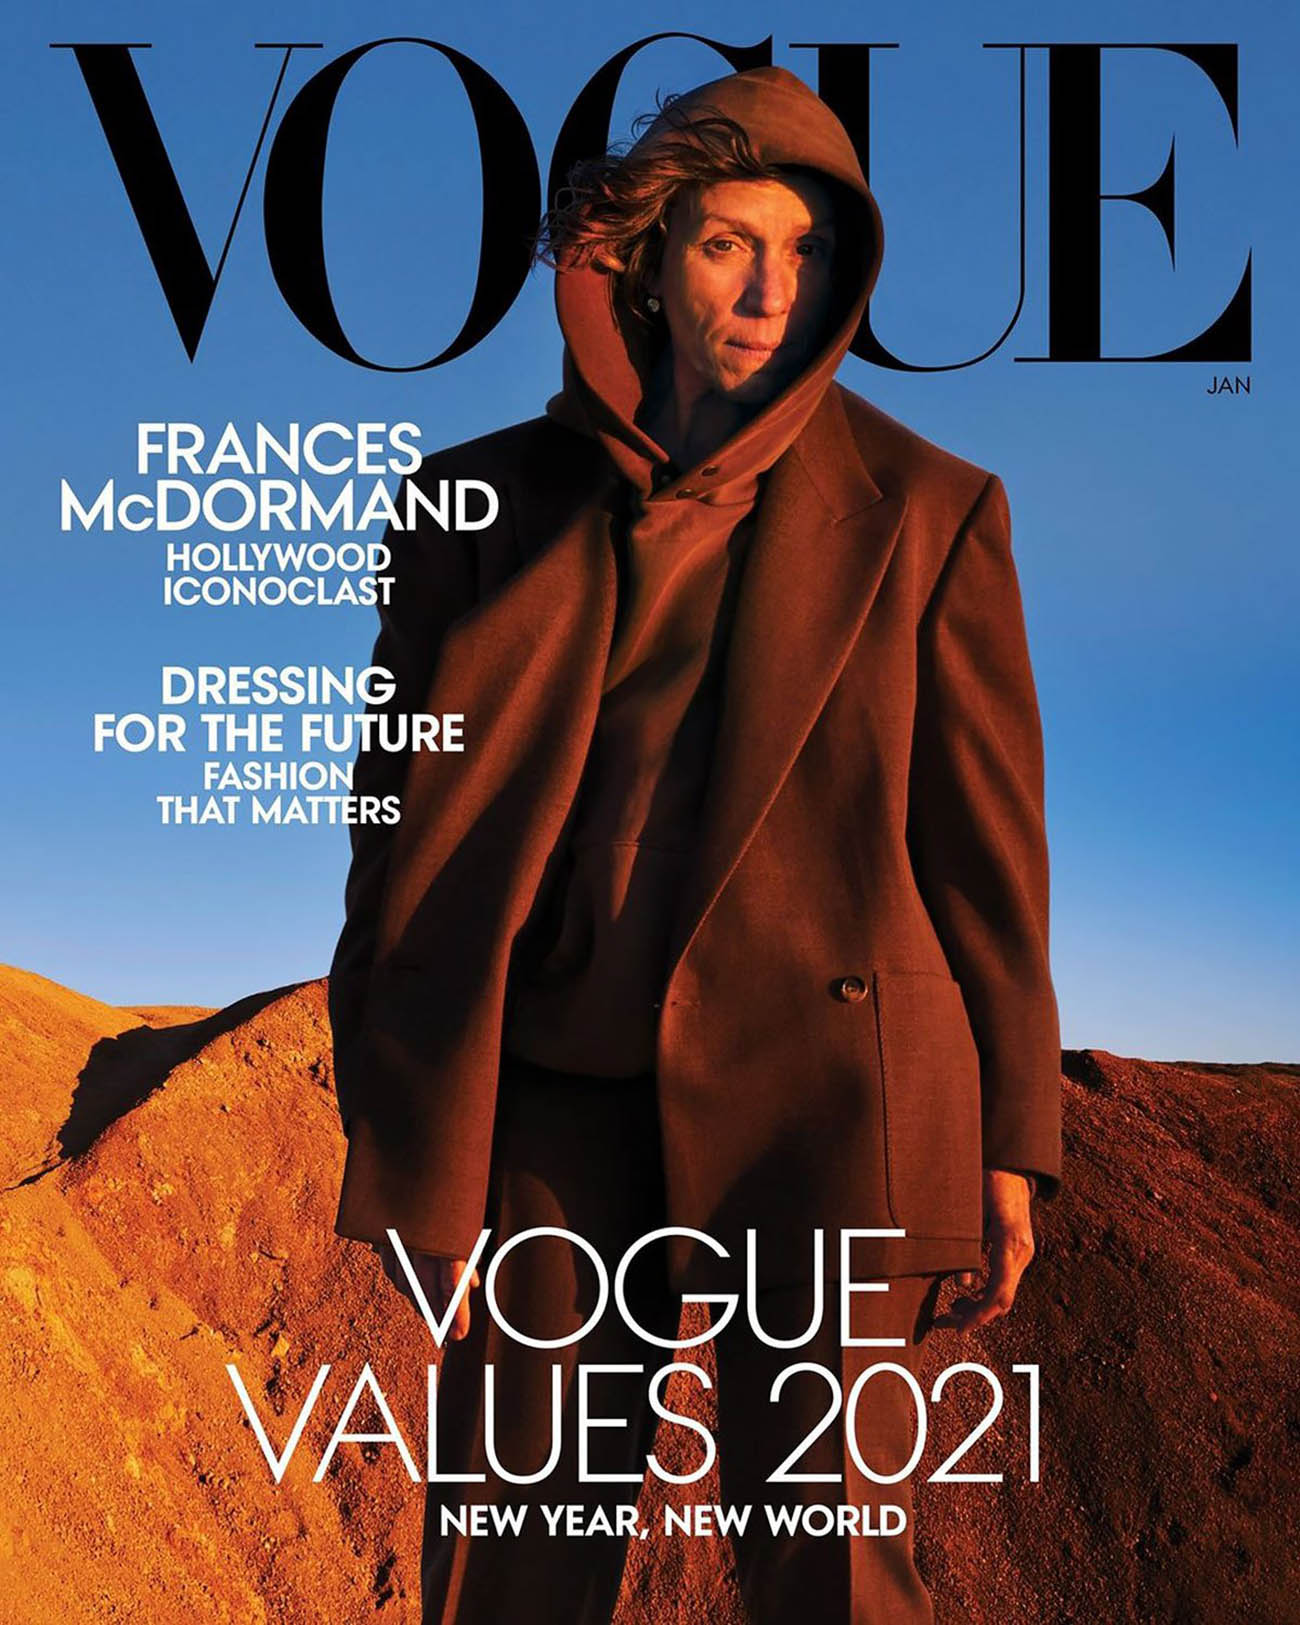 Vogue US January 2021 covers by Annie Leibovitz